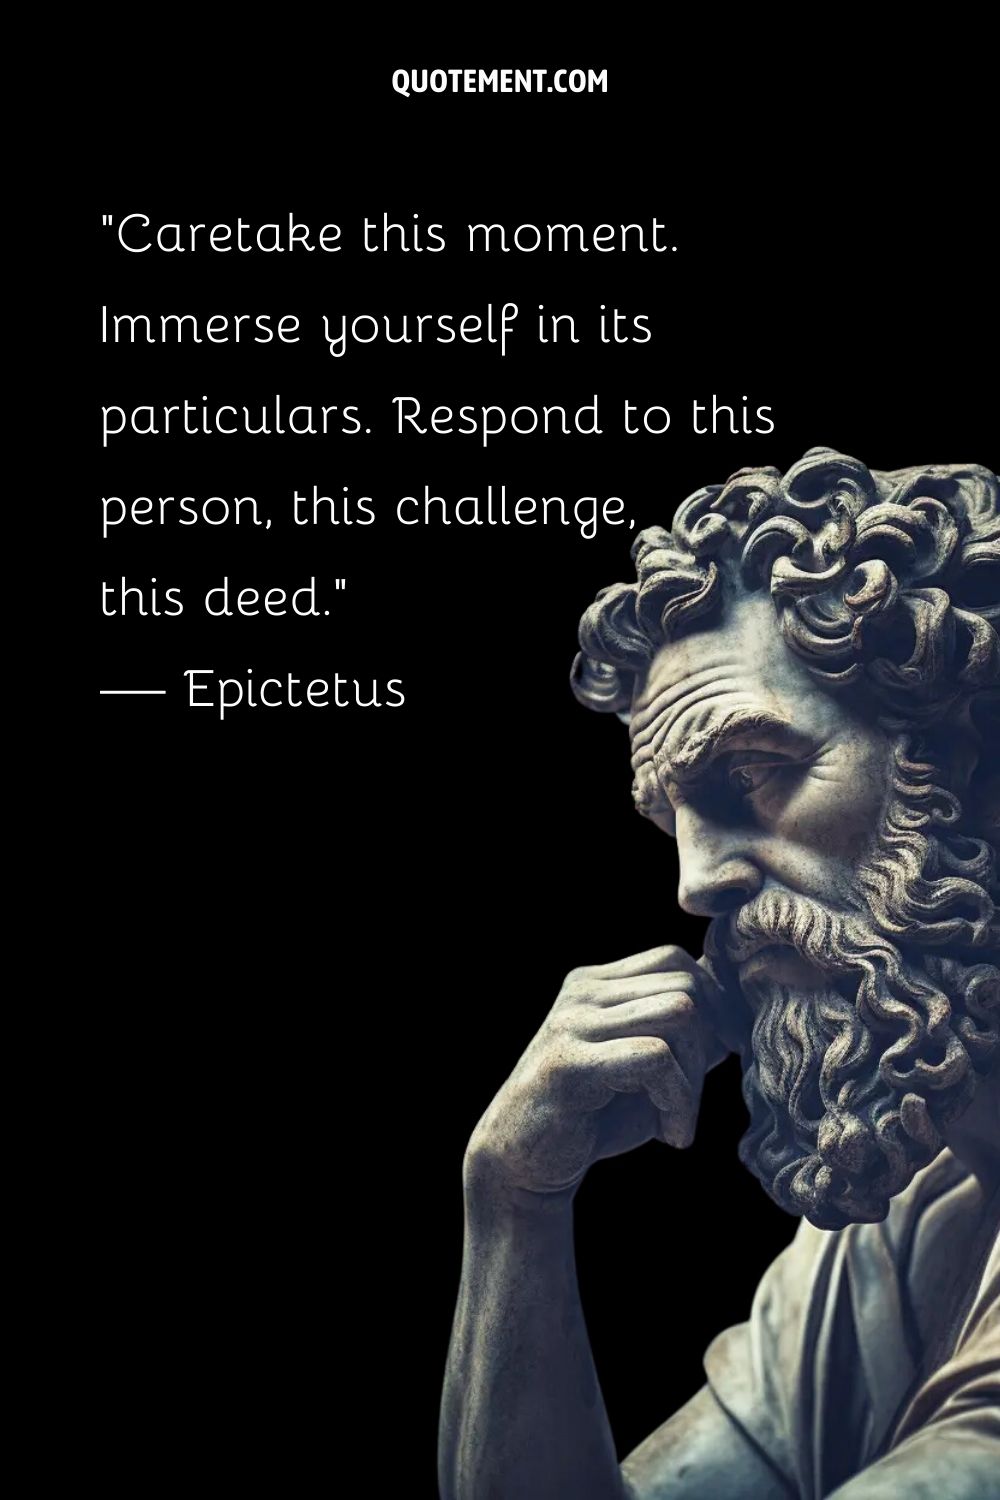 Epictetus' stoic wisdom encapsulated in sculpted marble form